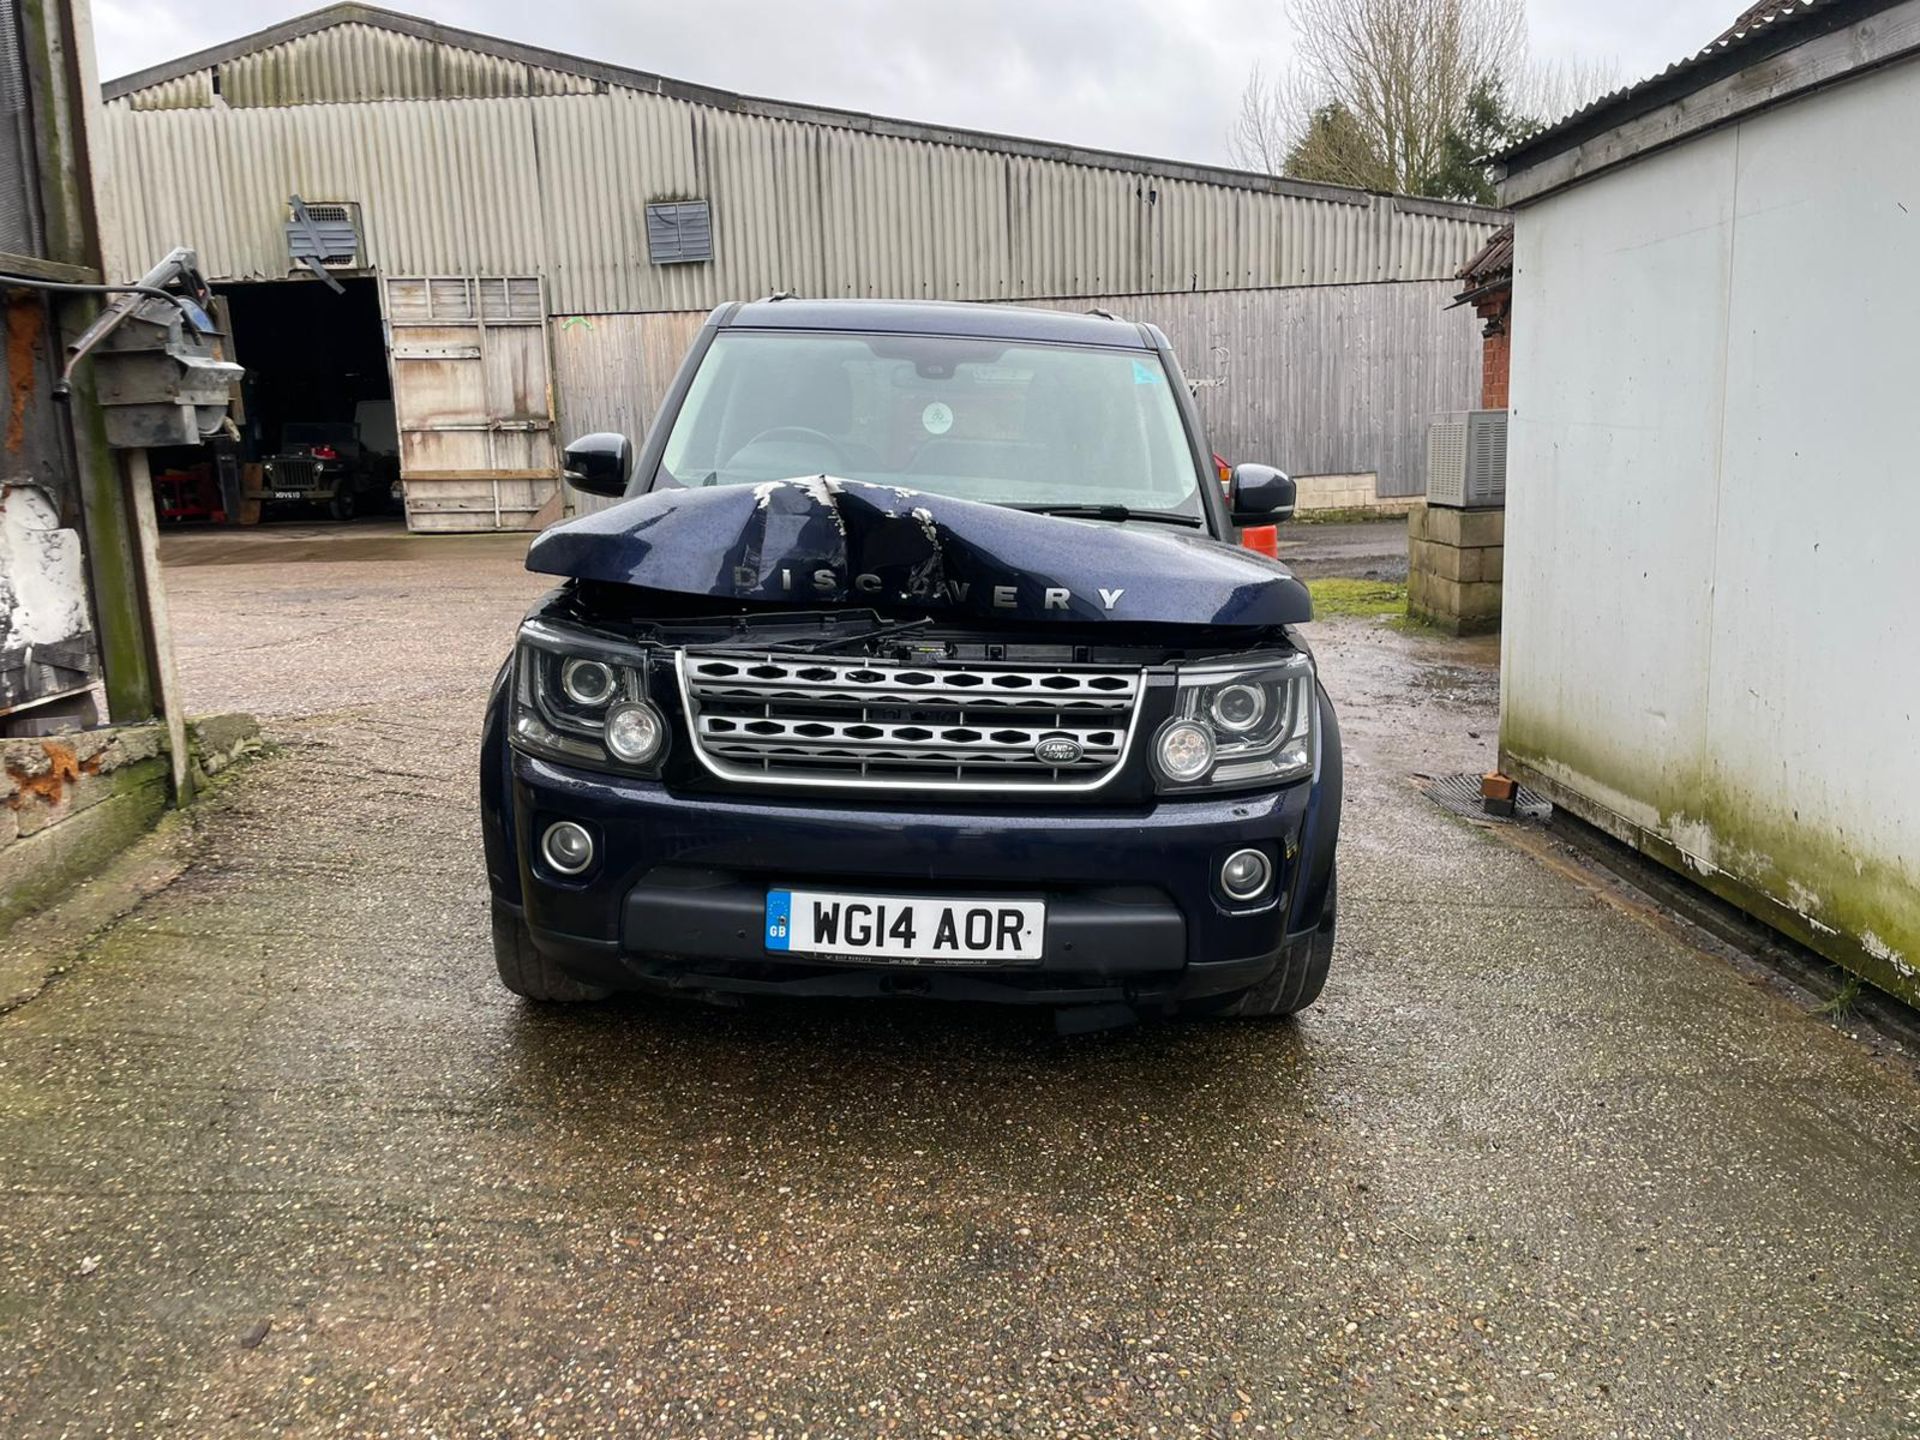 2014 LAND ROVER DISCOVERY XS SDV6 AUTO CAR DERIVED VAN - NON RUNNER PROJECT WITH PARTS *PLUS VAT* - Image 2 of 13